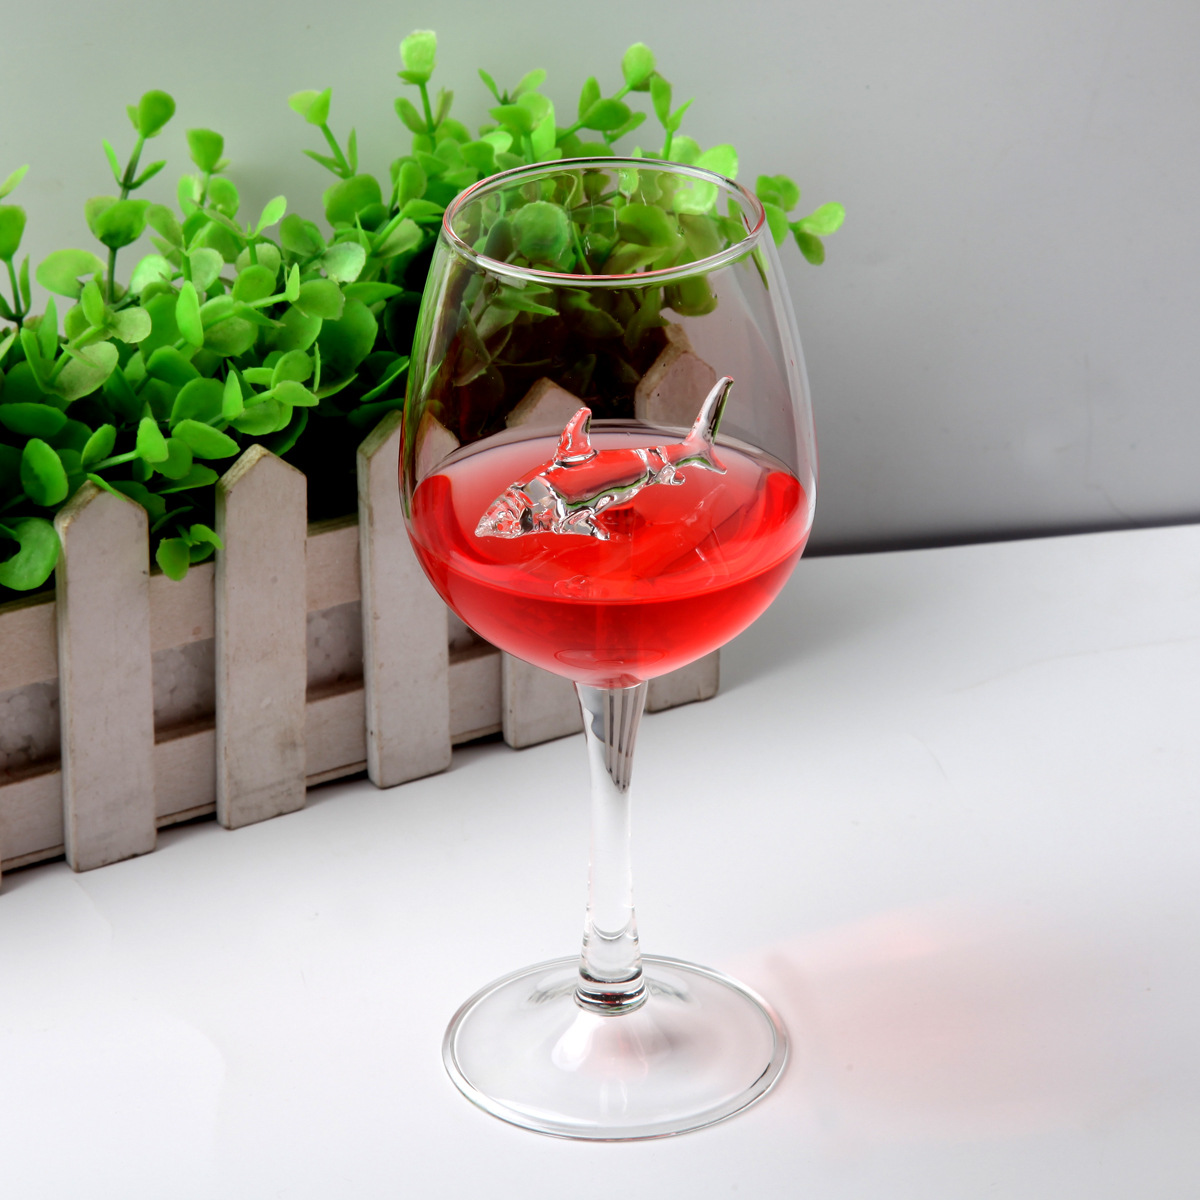 The Original Shark Red Wine Glass Wine Bottle Crystal For Party Flutes Glass